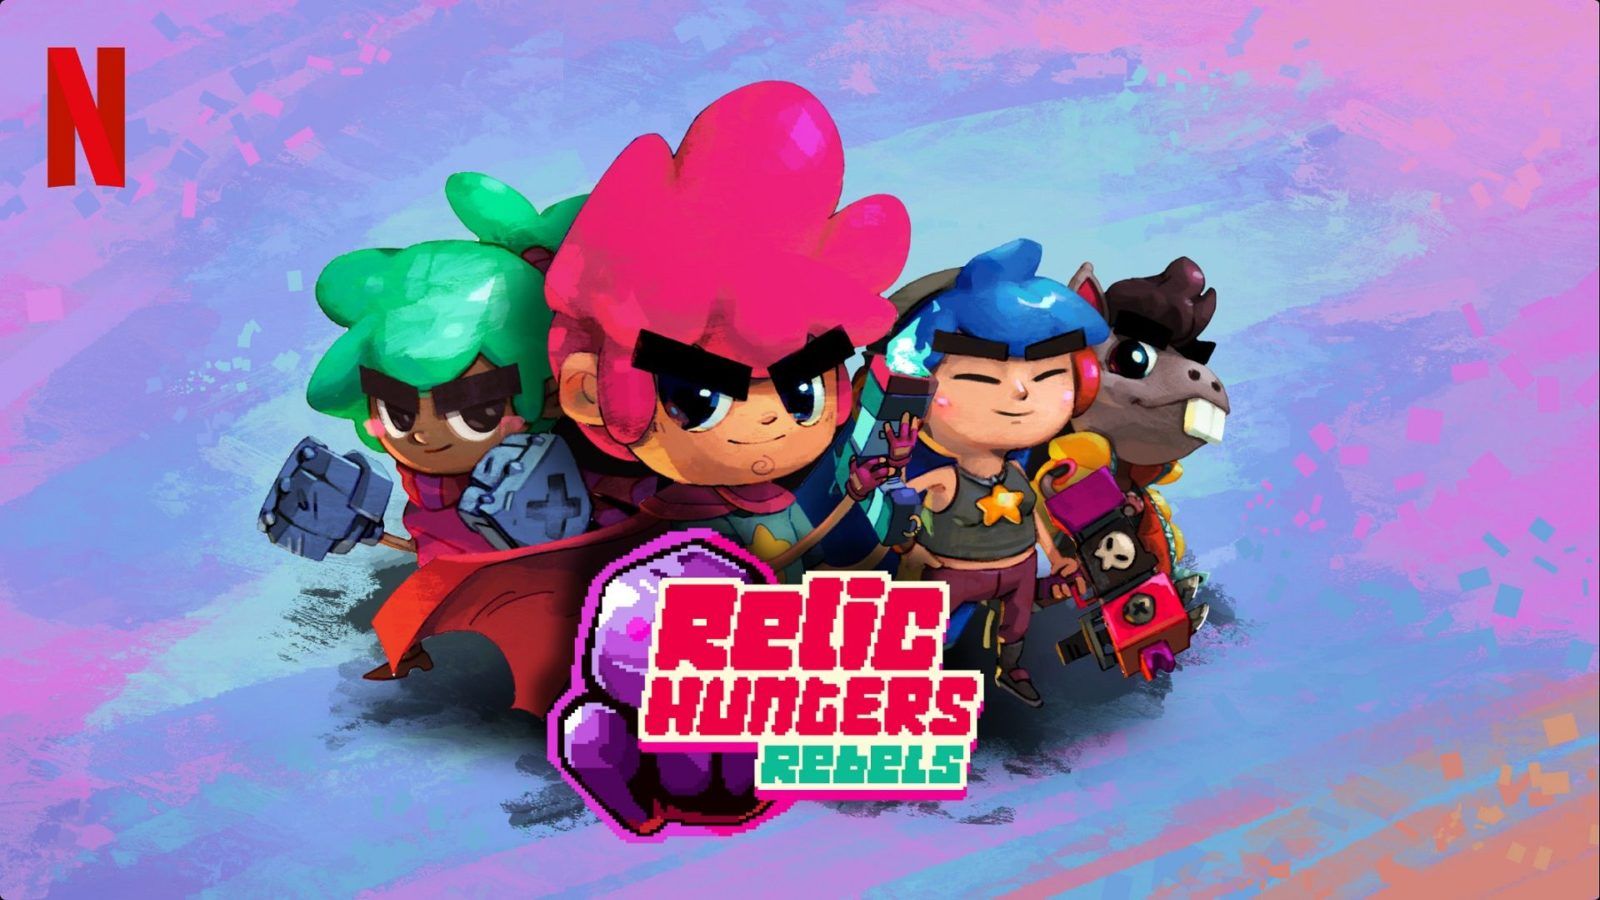 Netflix adds ‘Relic Hunters: Rebels’ to its first mobile games list